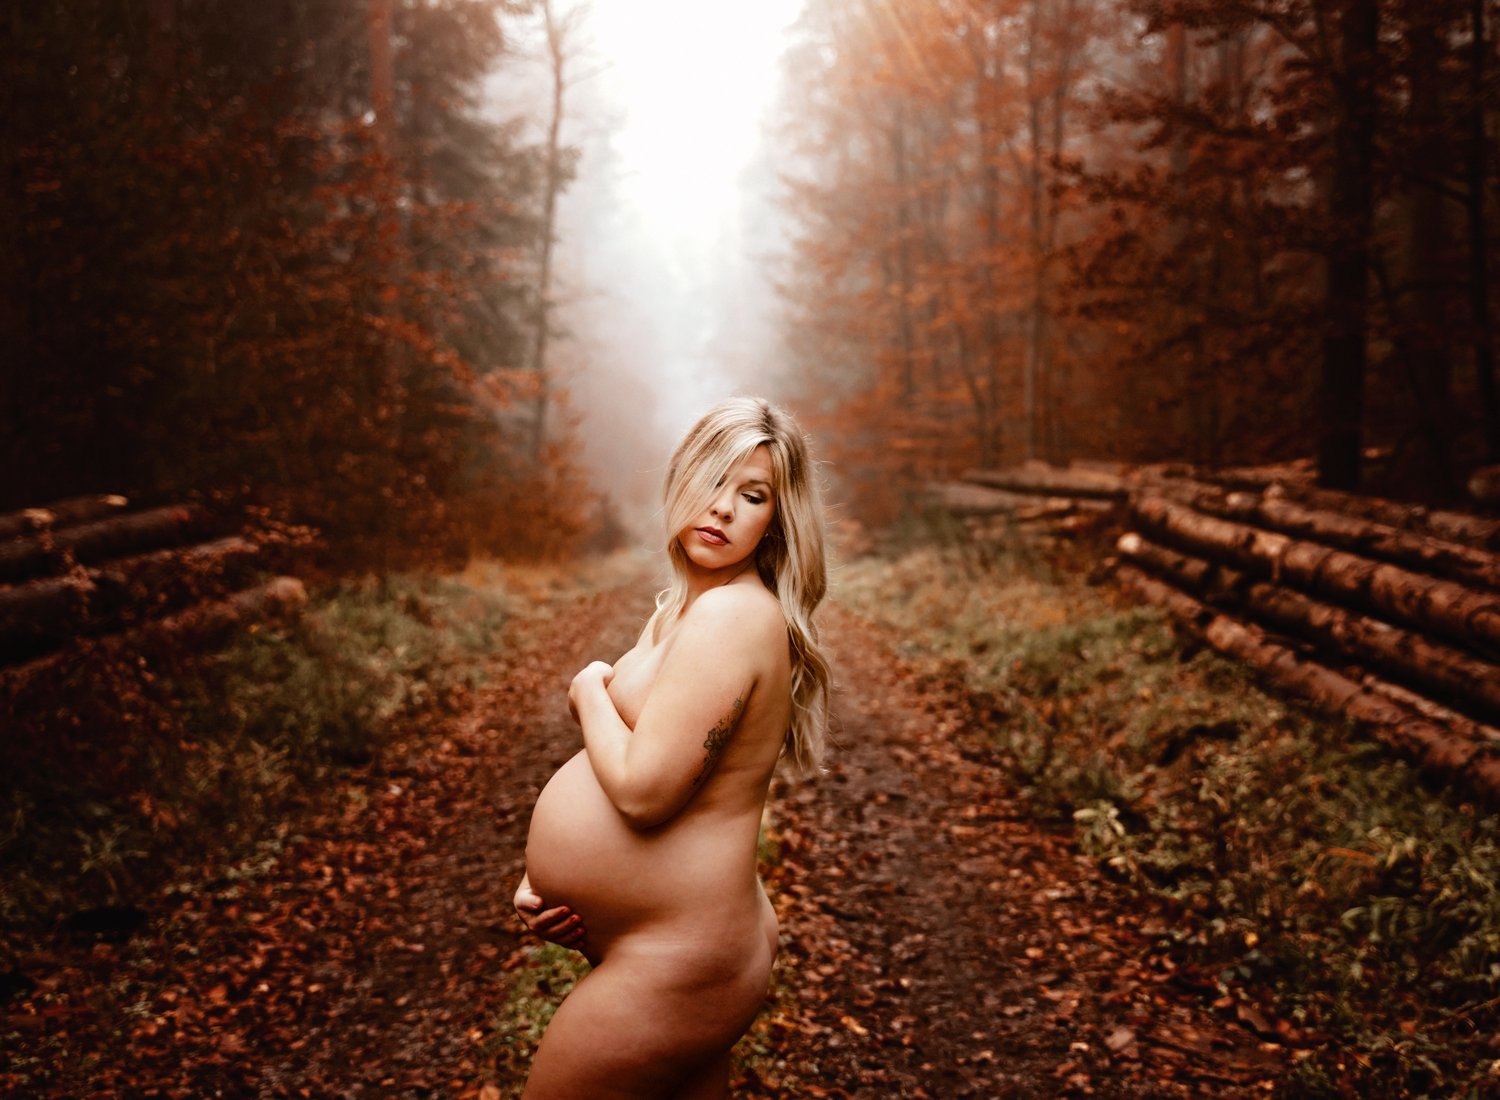 beautiful-expecting-mother-to-be-in-moody-fall-scenery-in-the-woods-nude-fine-art-portrait-at-maternity-session-ramstein-kmc-kaiserslautern-germany.jpg